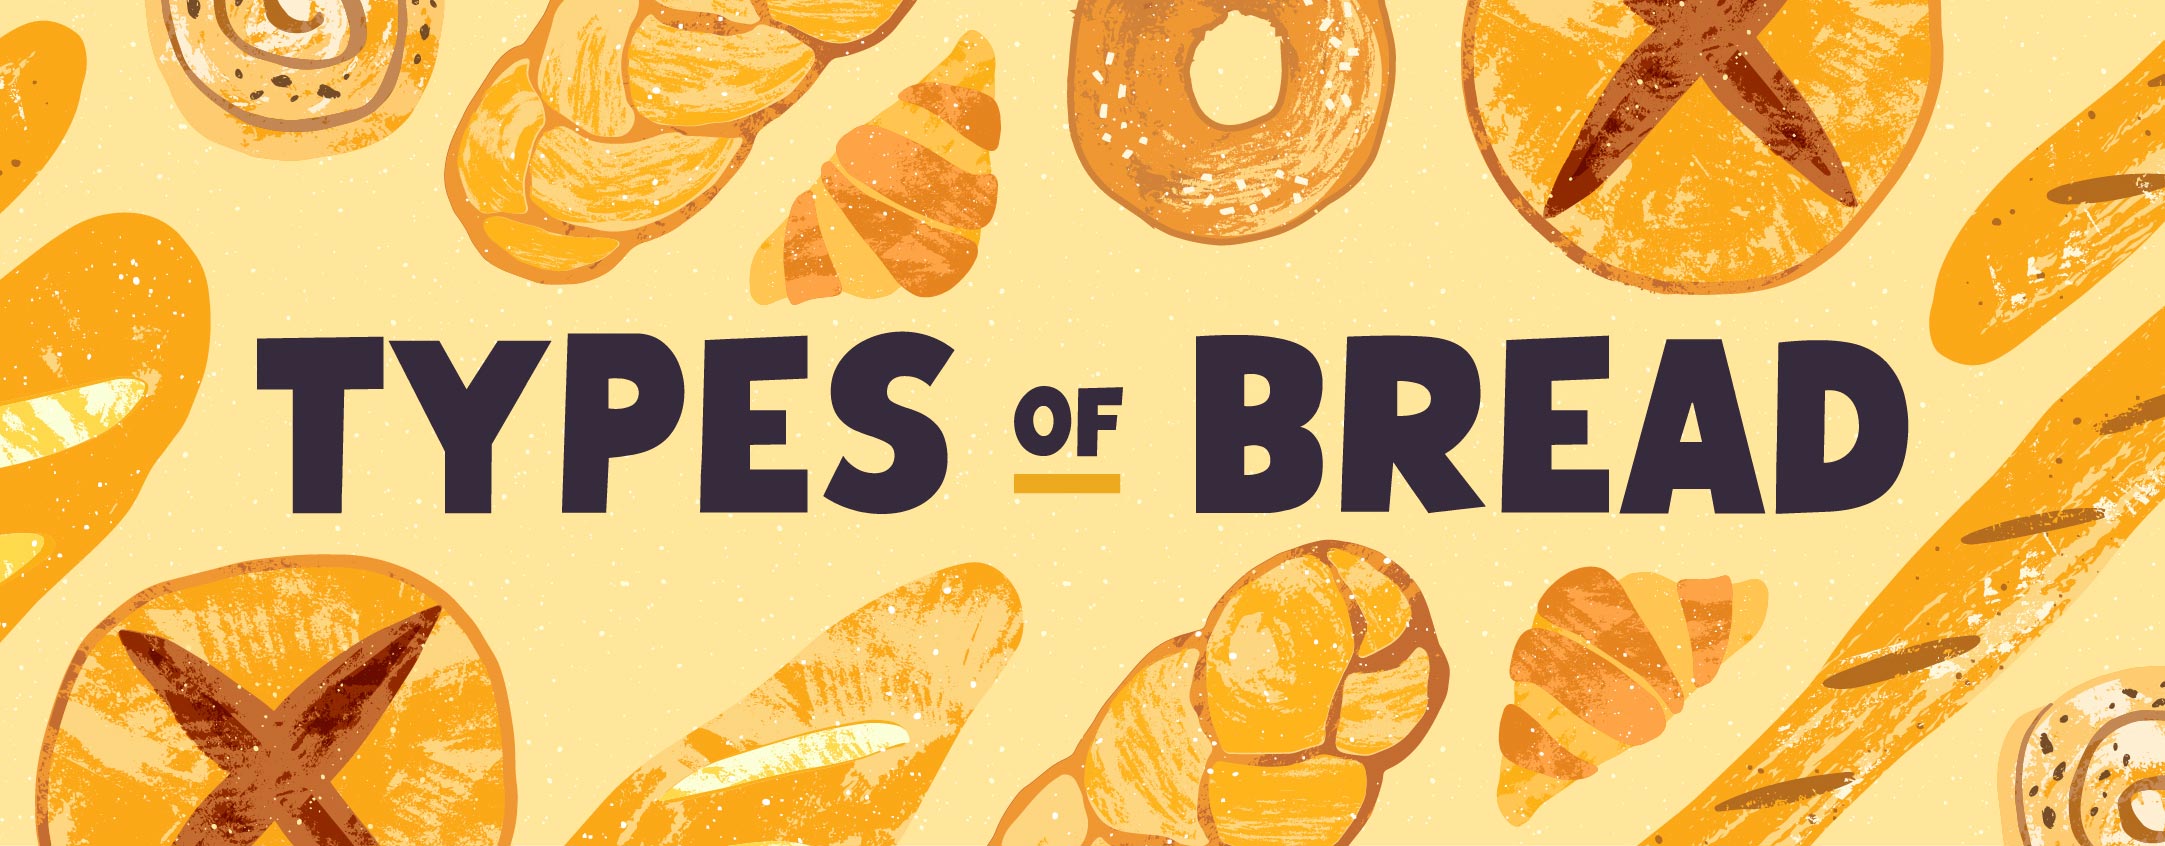 20 Types of Bread: Your Complete Guide & List